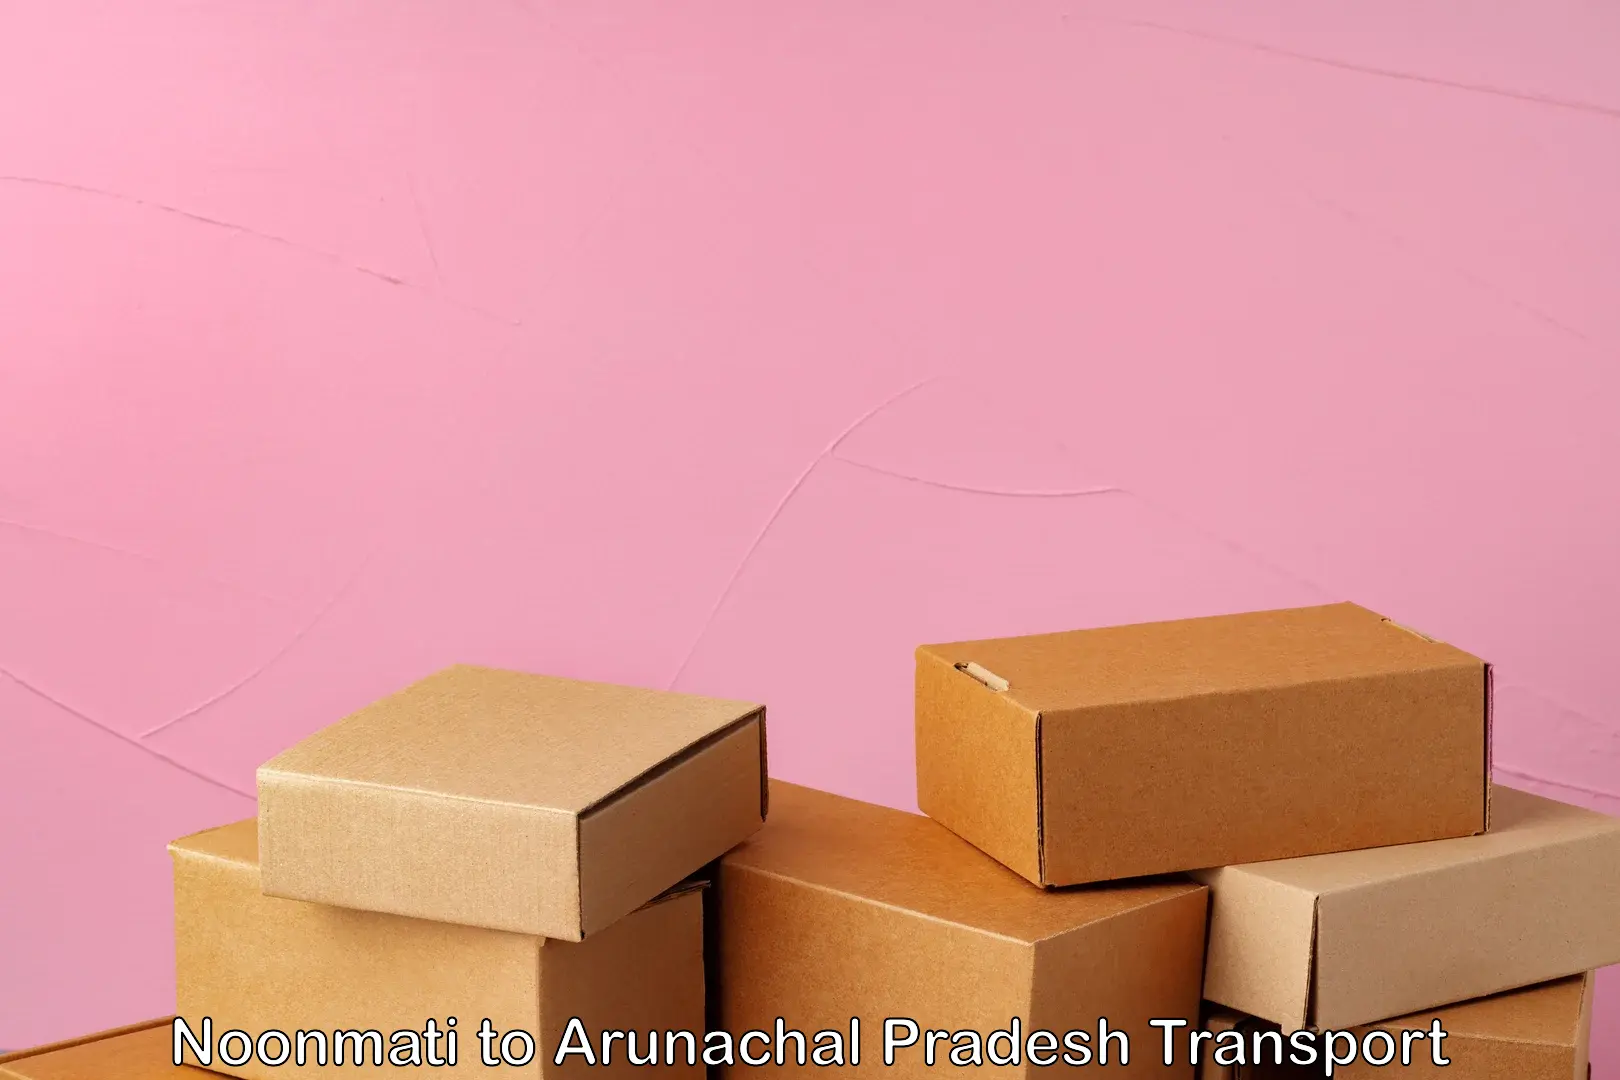 Truck transport companies in India Noonmati to Deomali